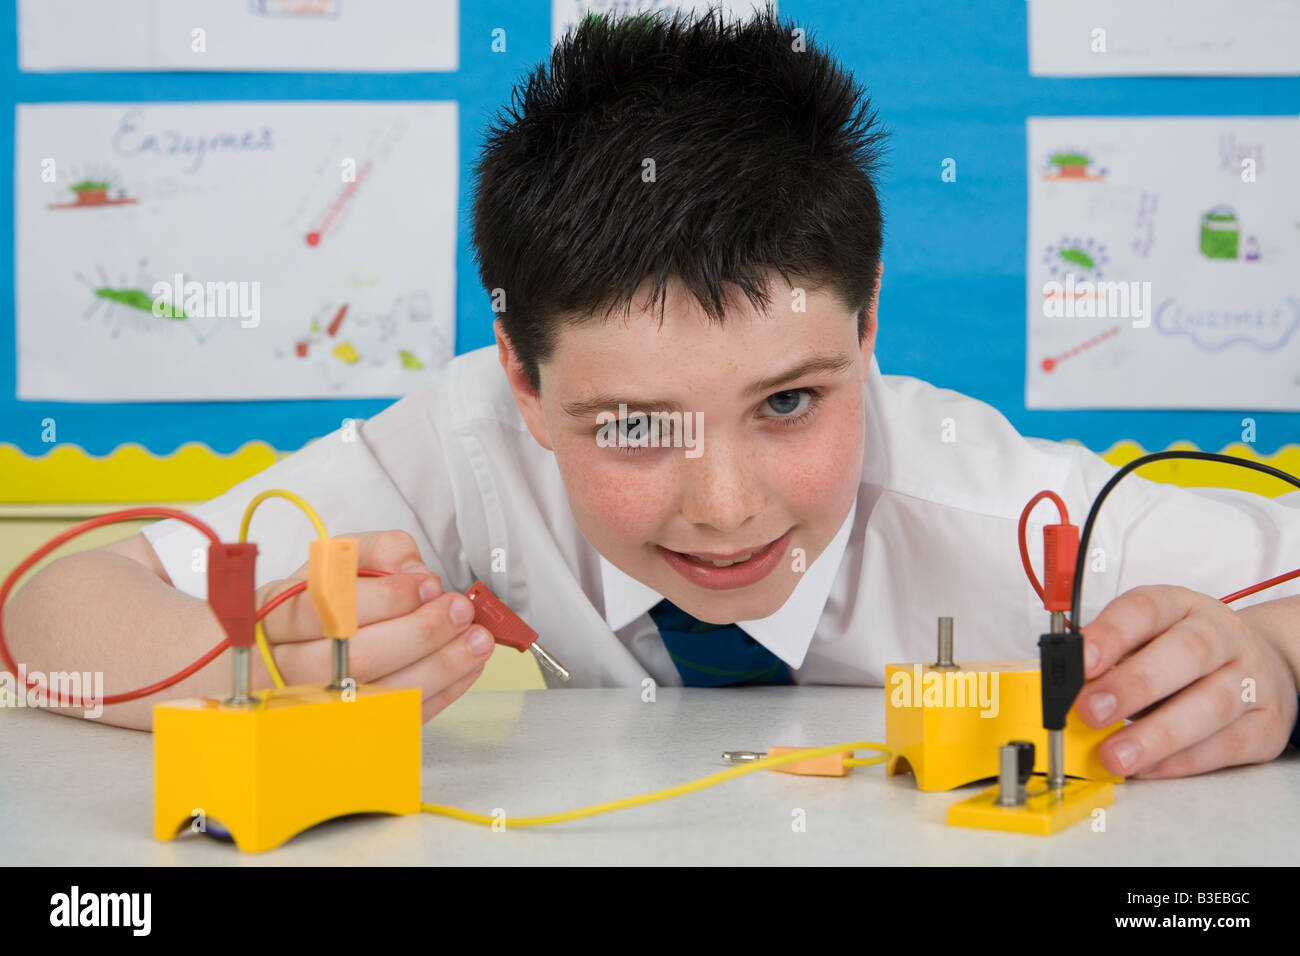 Boy in science lesson Stock Photo